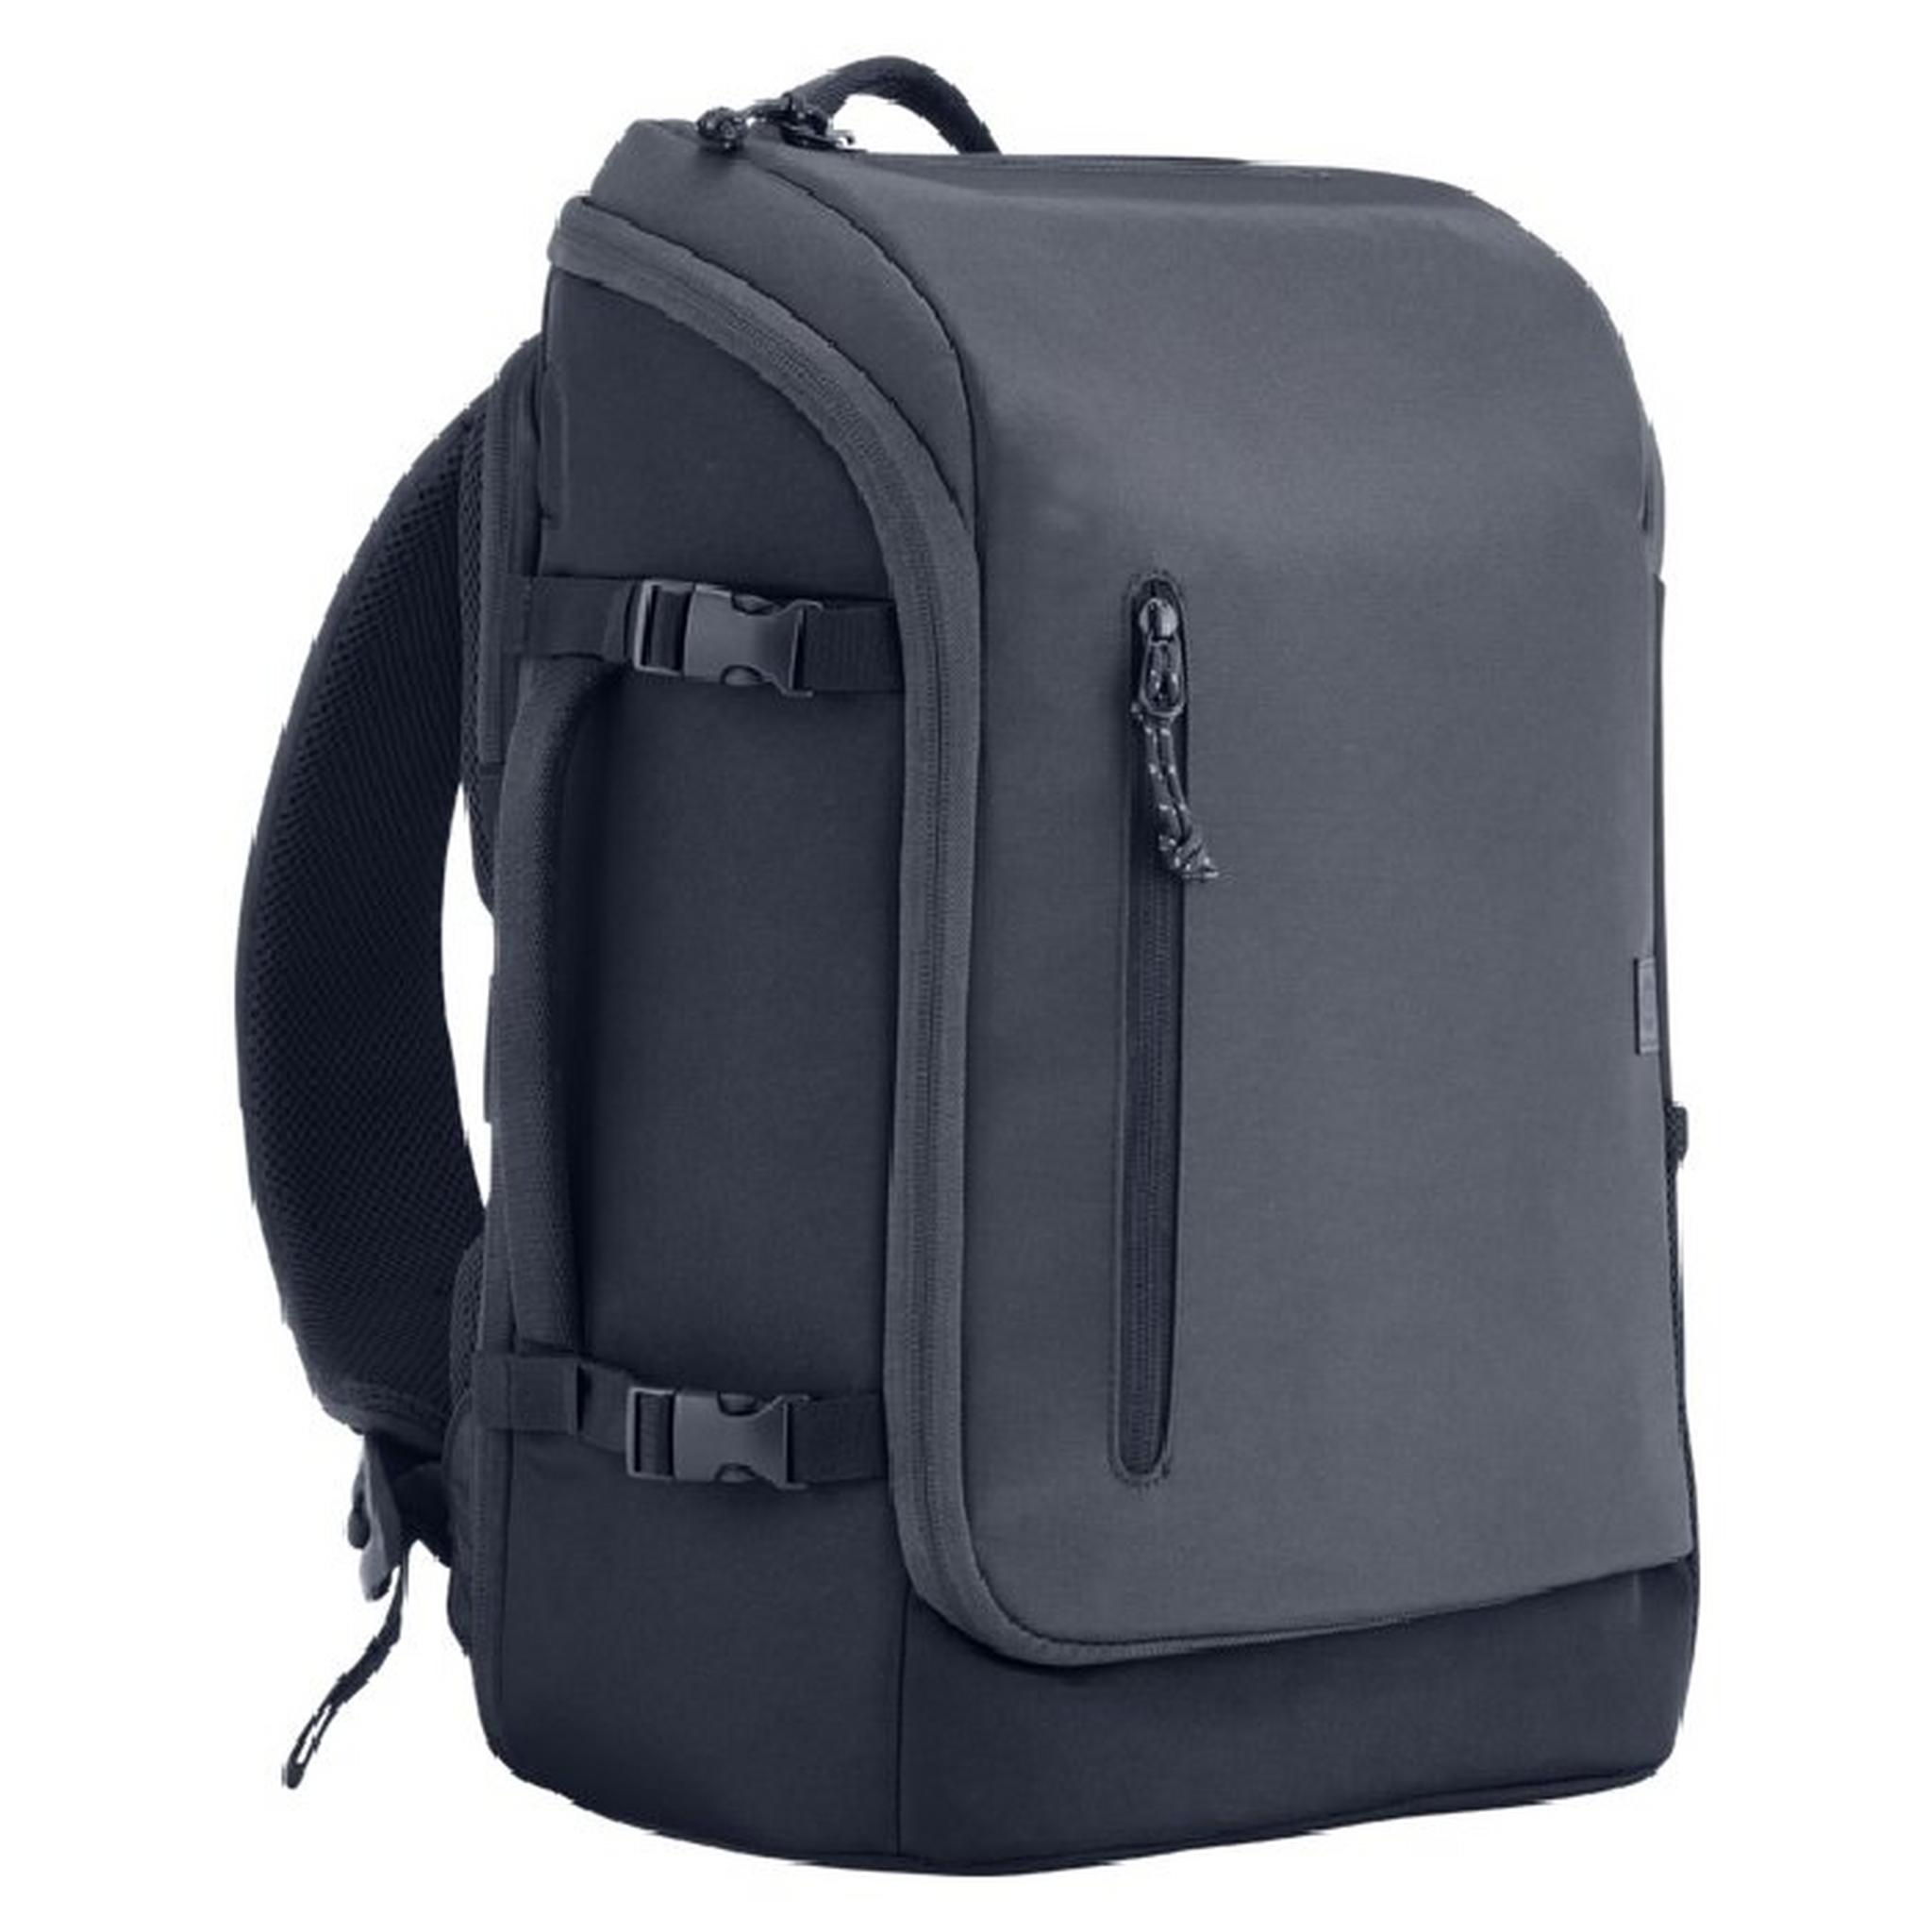 HP Travel Expandable Backpack for Laptops, 15.6 inch, 6B8U4AA - Iron Grey